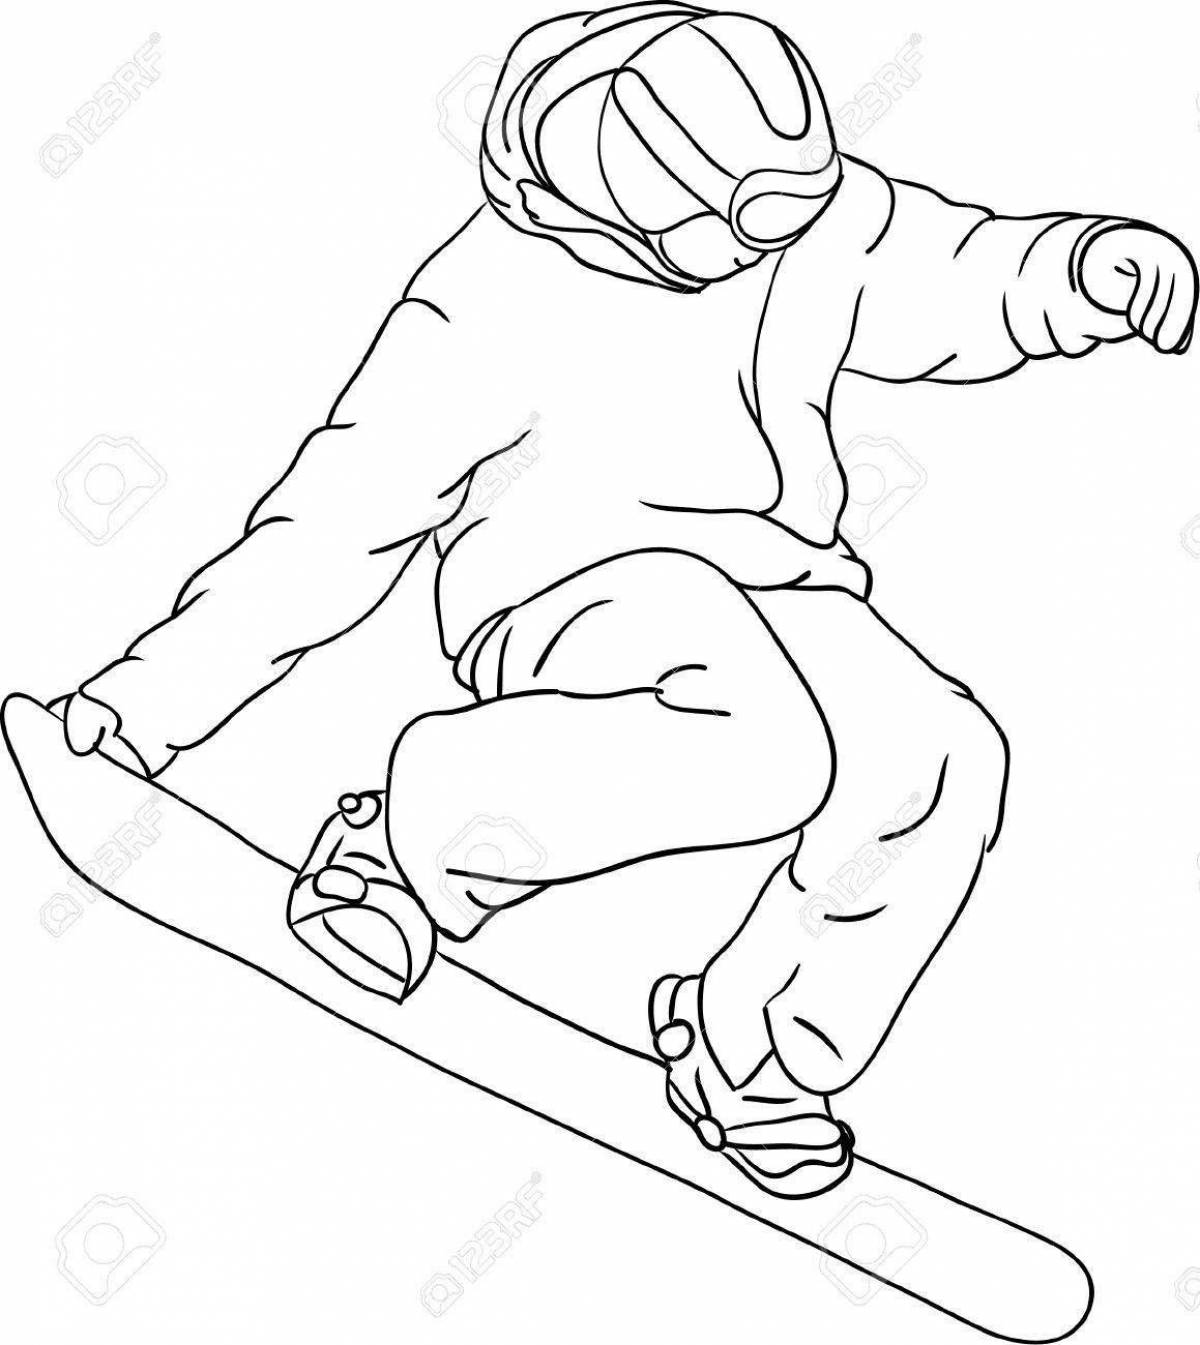 Snowboard coloring page for children